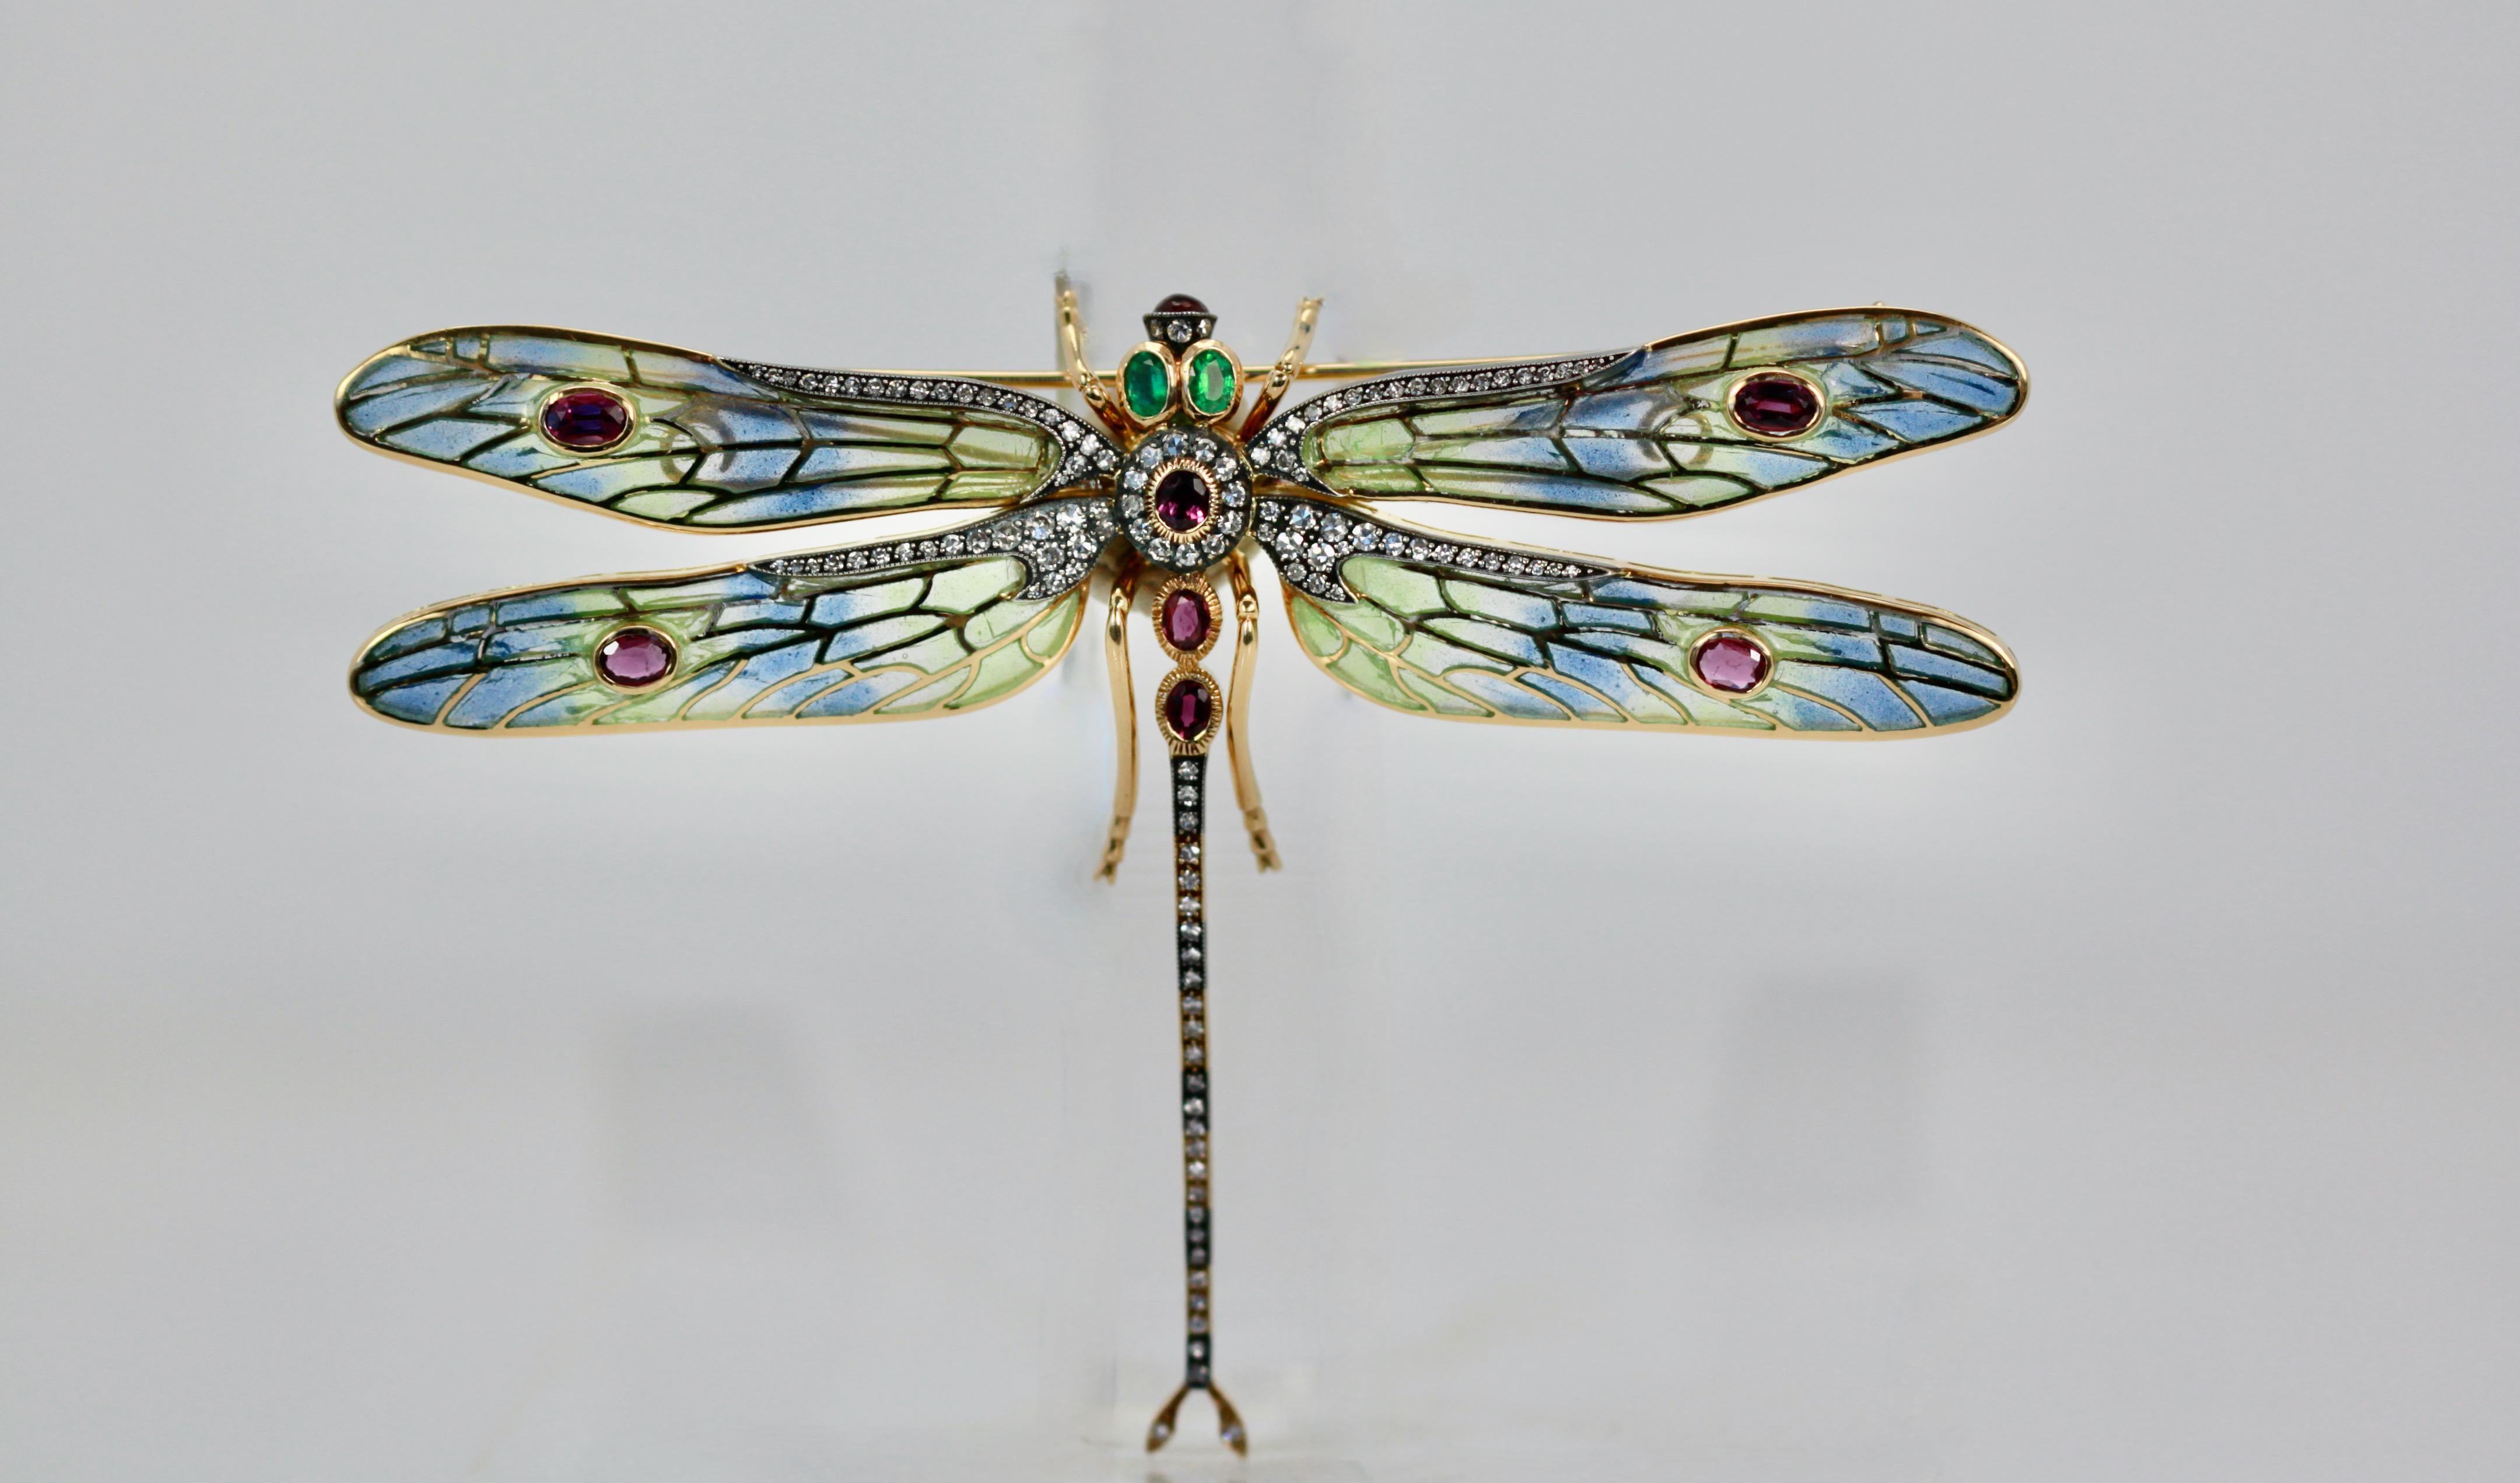 This gorgeous Plique a Jour dragonfly is 10.5 cm wide and 7.0 cm long (4.25